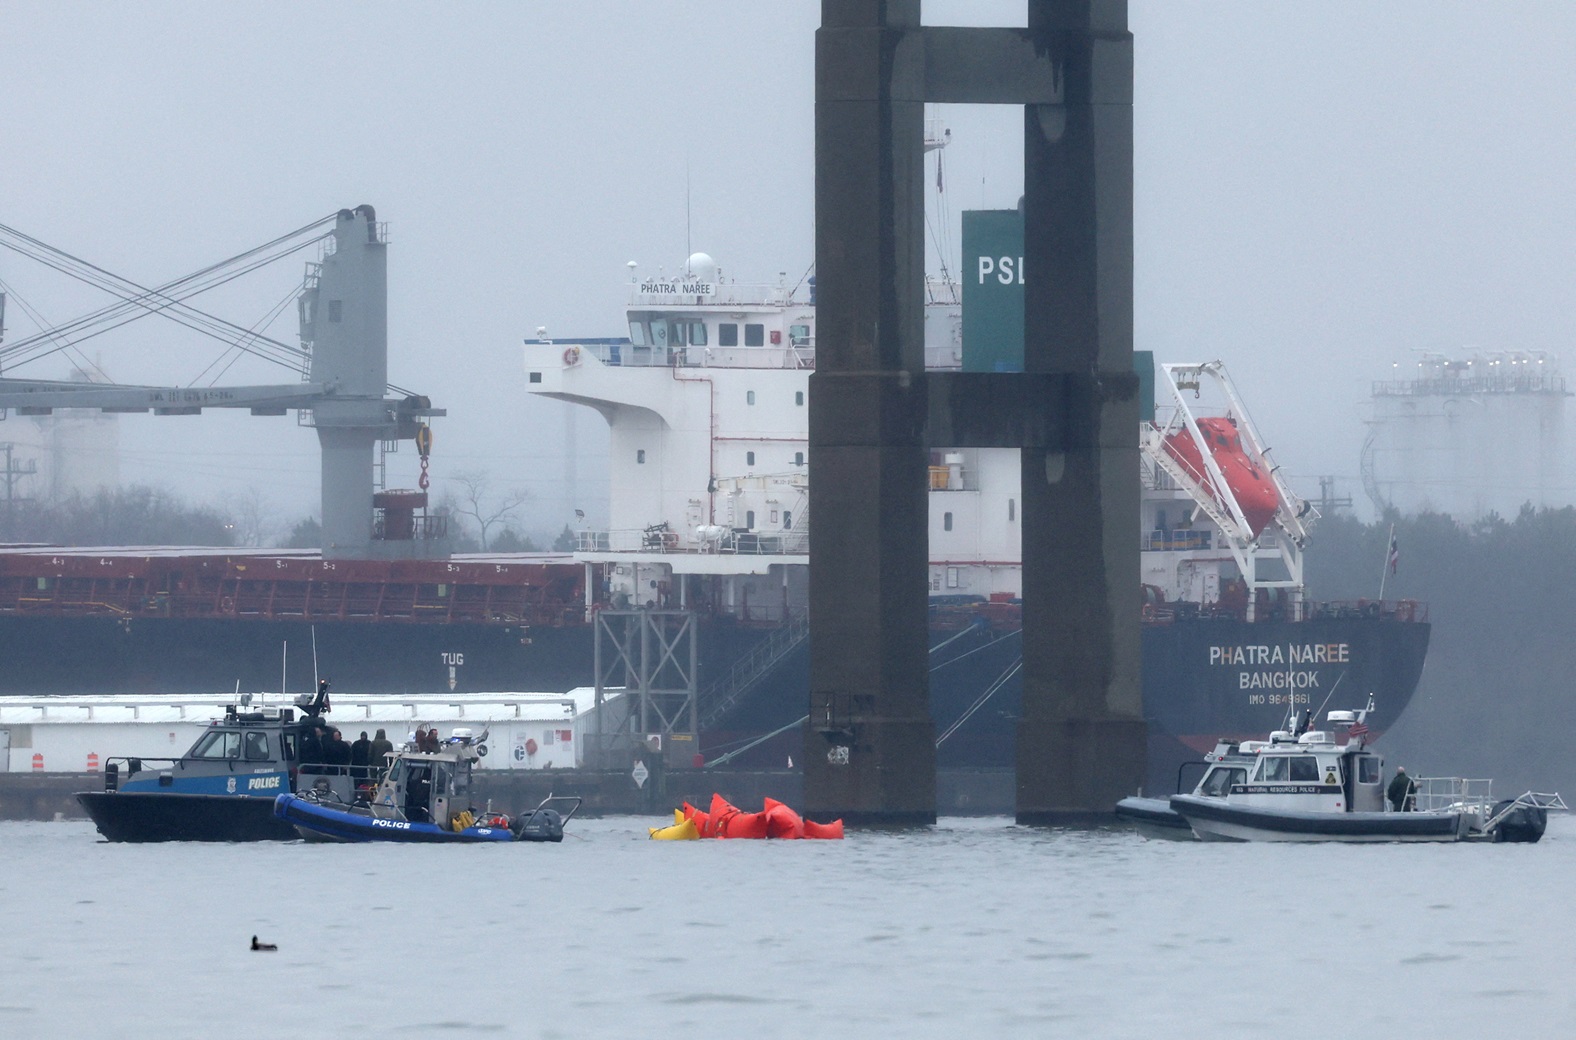 Emergency dive teams work at the scene of the collapsed bridge in Baltimore Harbor. Photo: Reuters